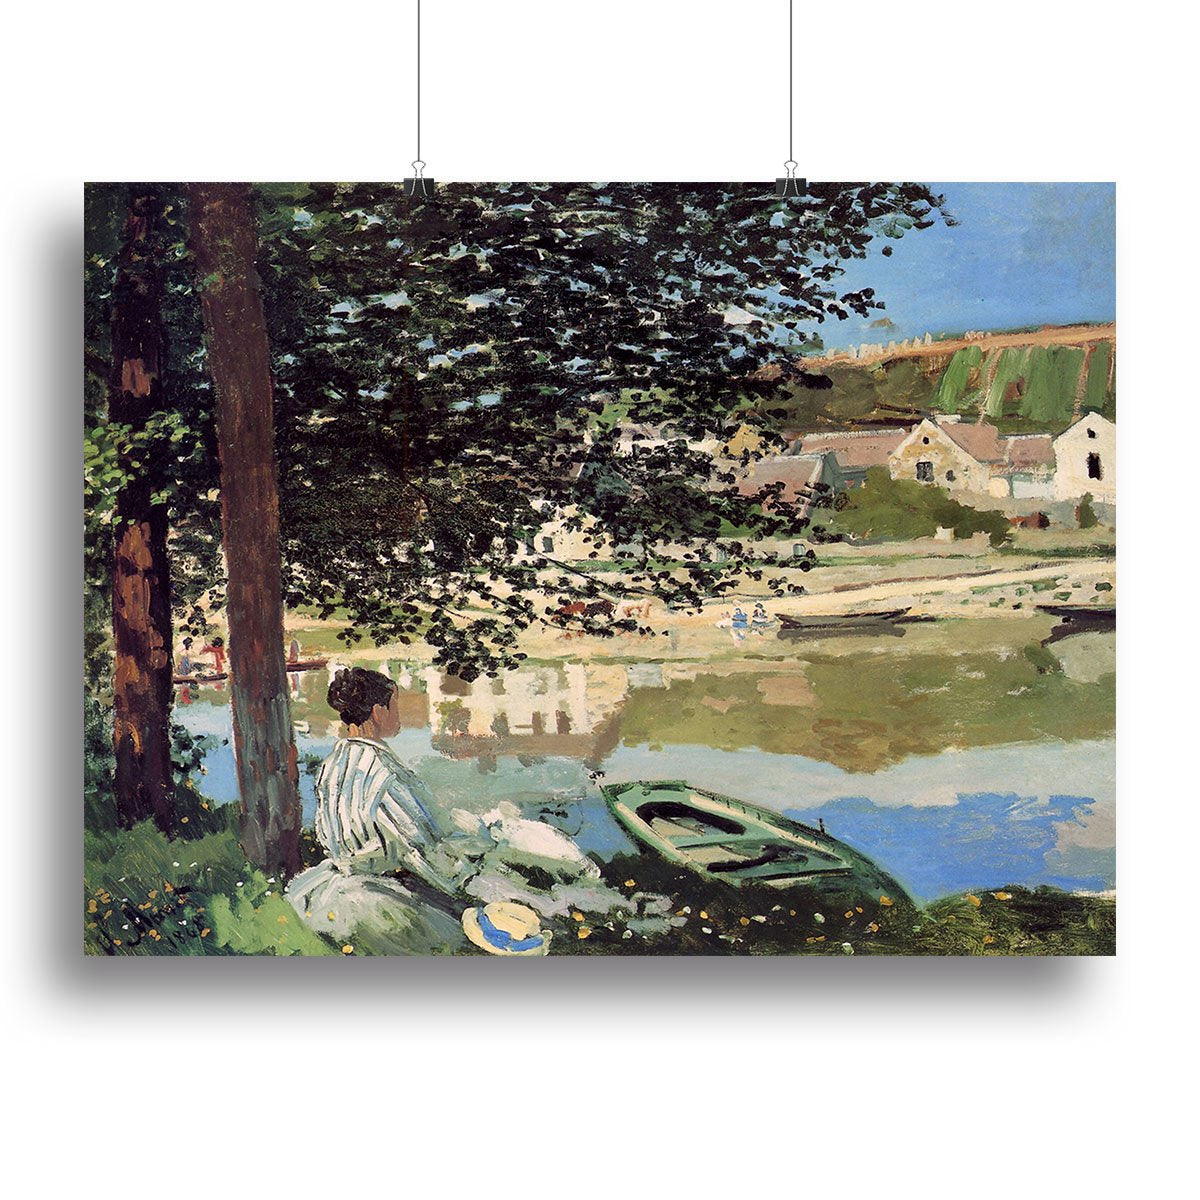 Seine bank at Vethueil by Monet Canvas Print or Poster